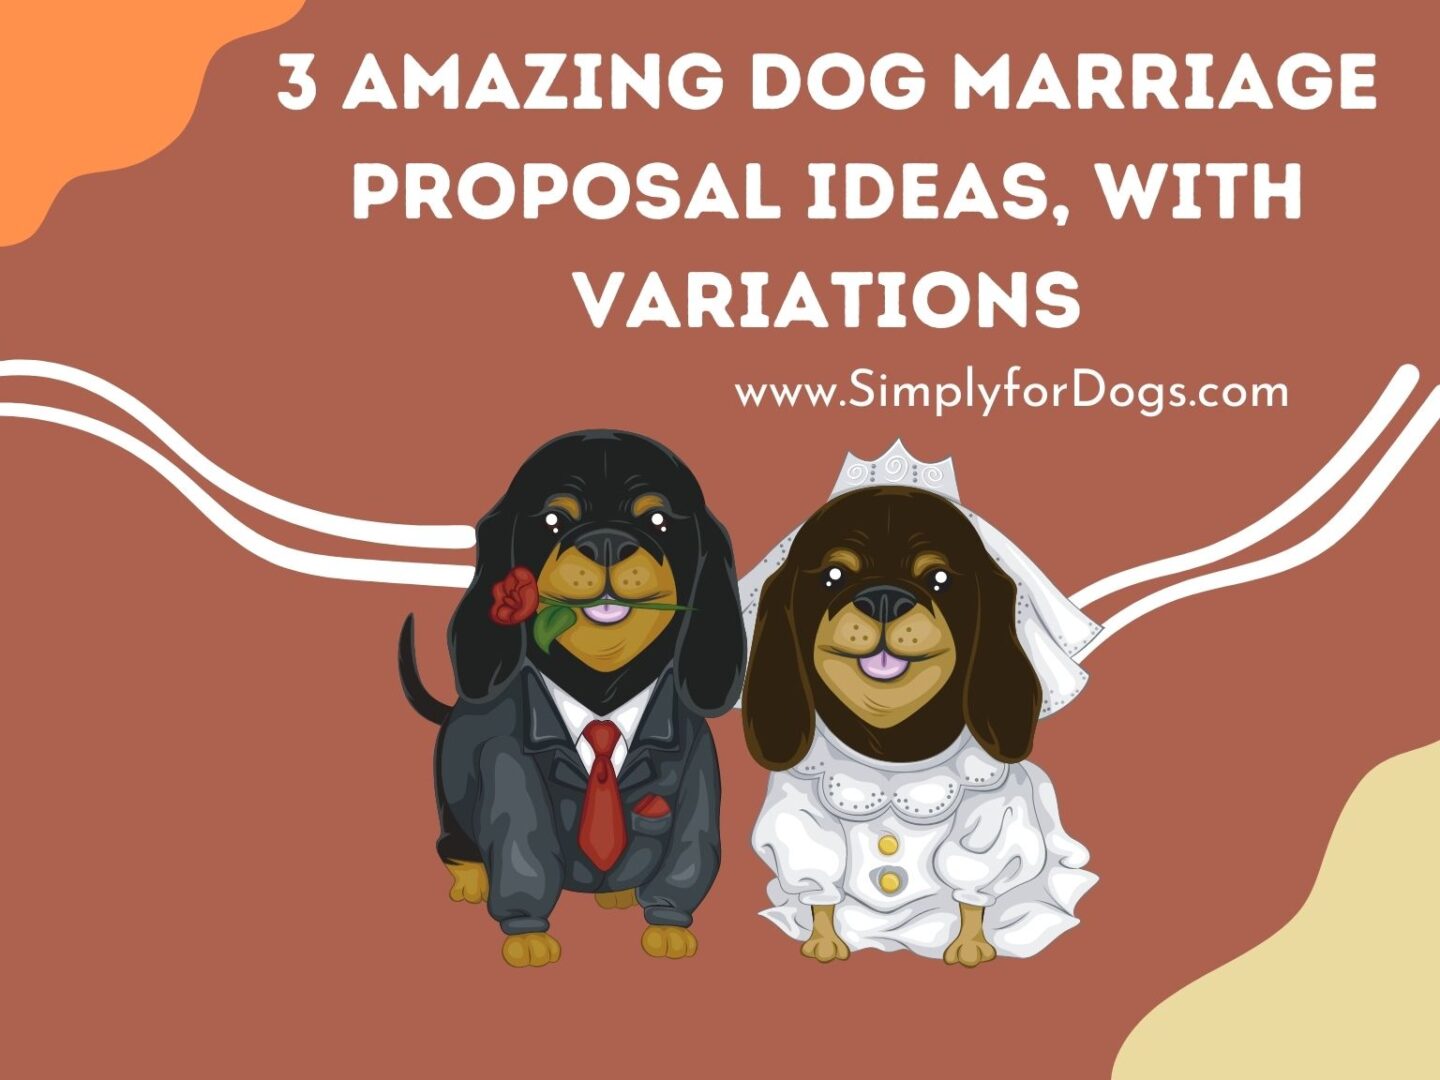 3 Amazing Dog Marriage Proposal Ideas, With Variations